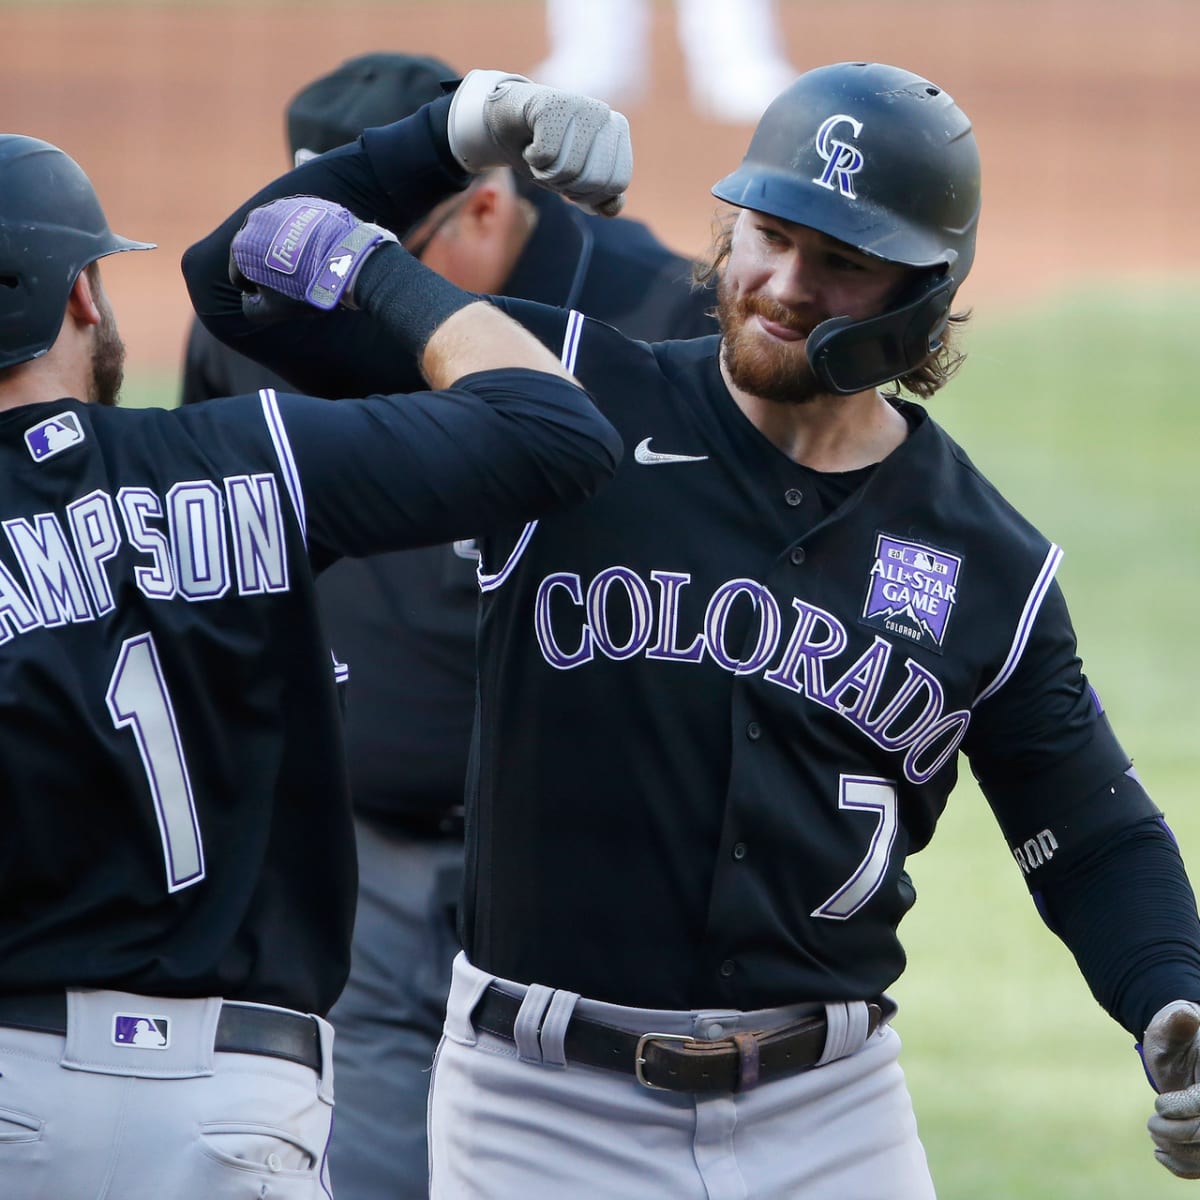 Colorado Rockies: Ian Desmond most valuable by sitting out